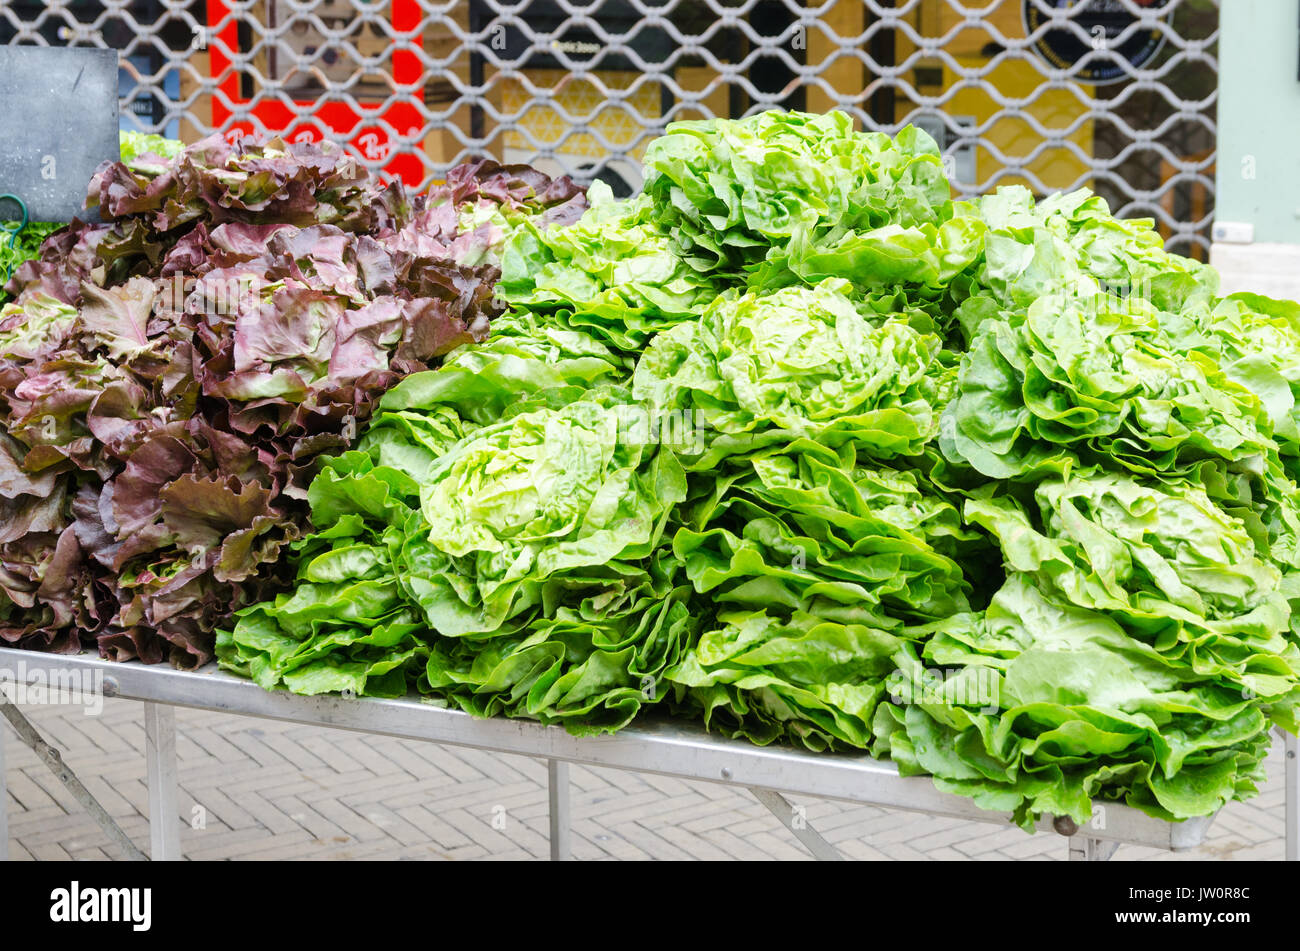 Fresh lettuces on display at Saturday market in Dieppe, Normandy, France Stock Photo